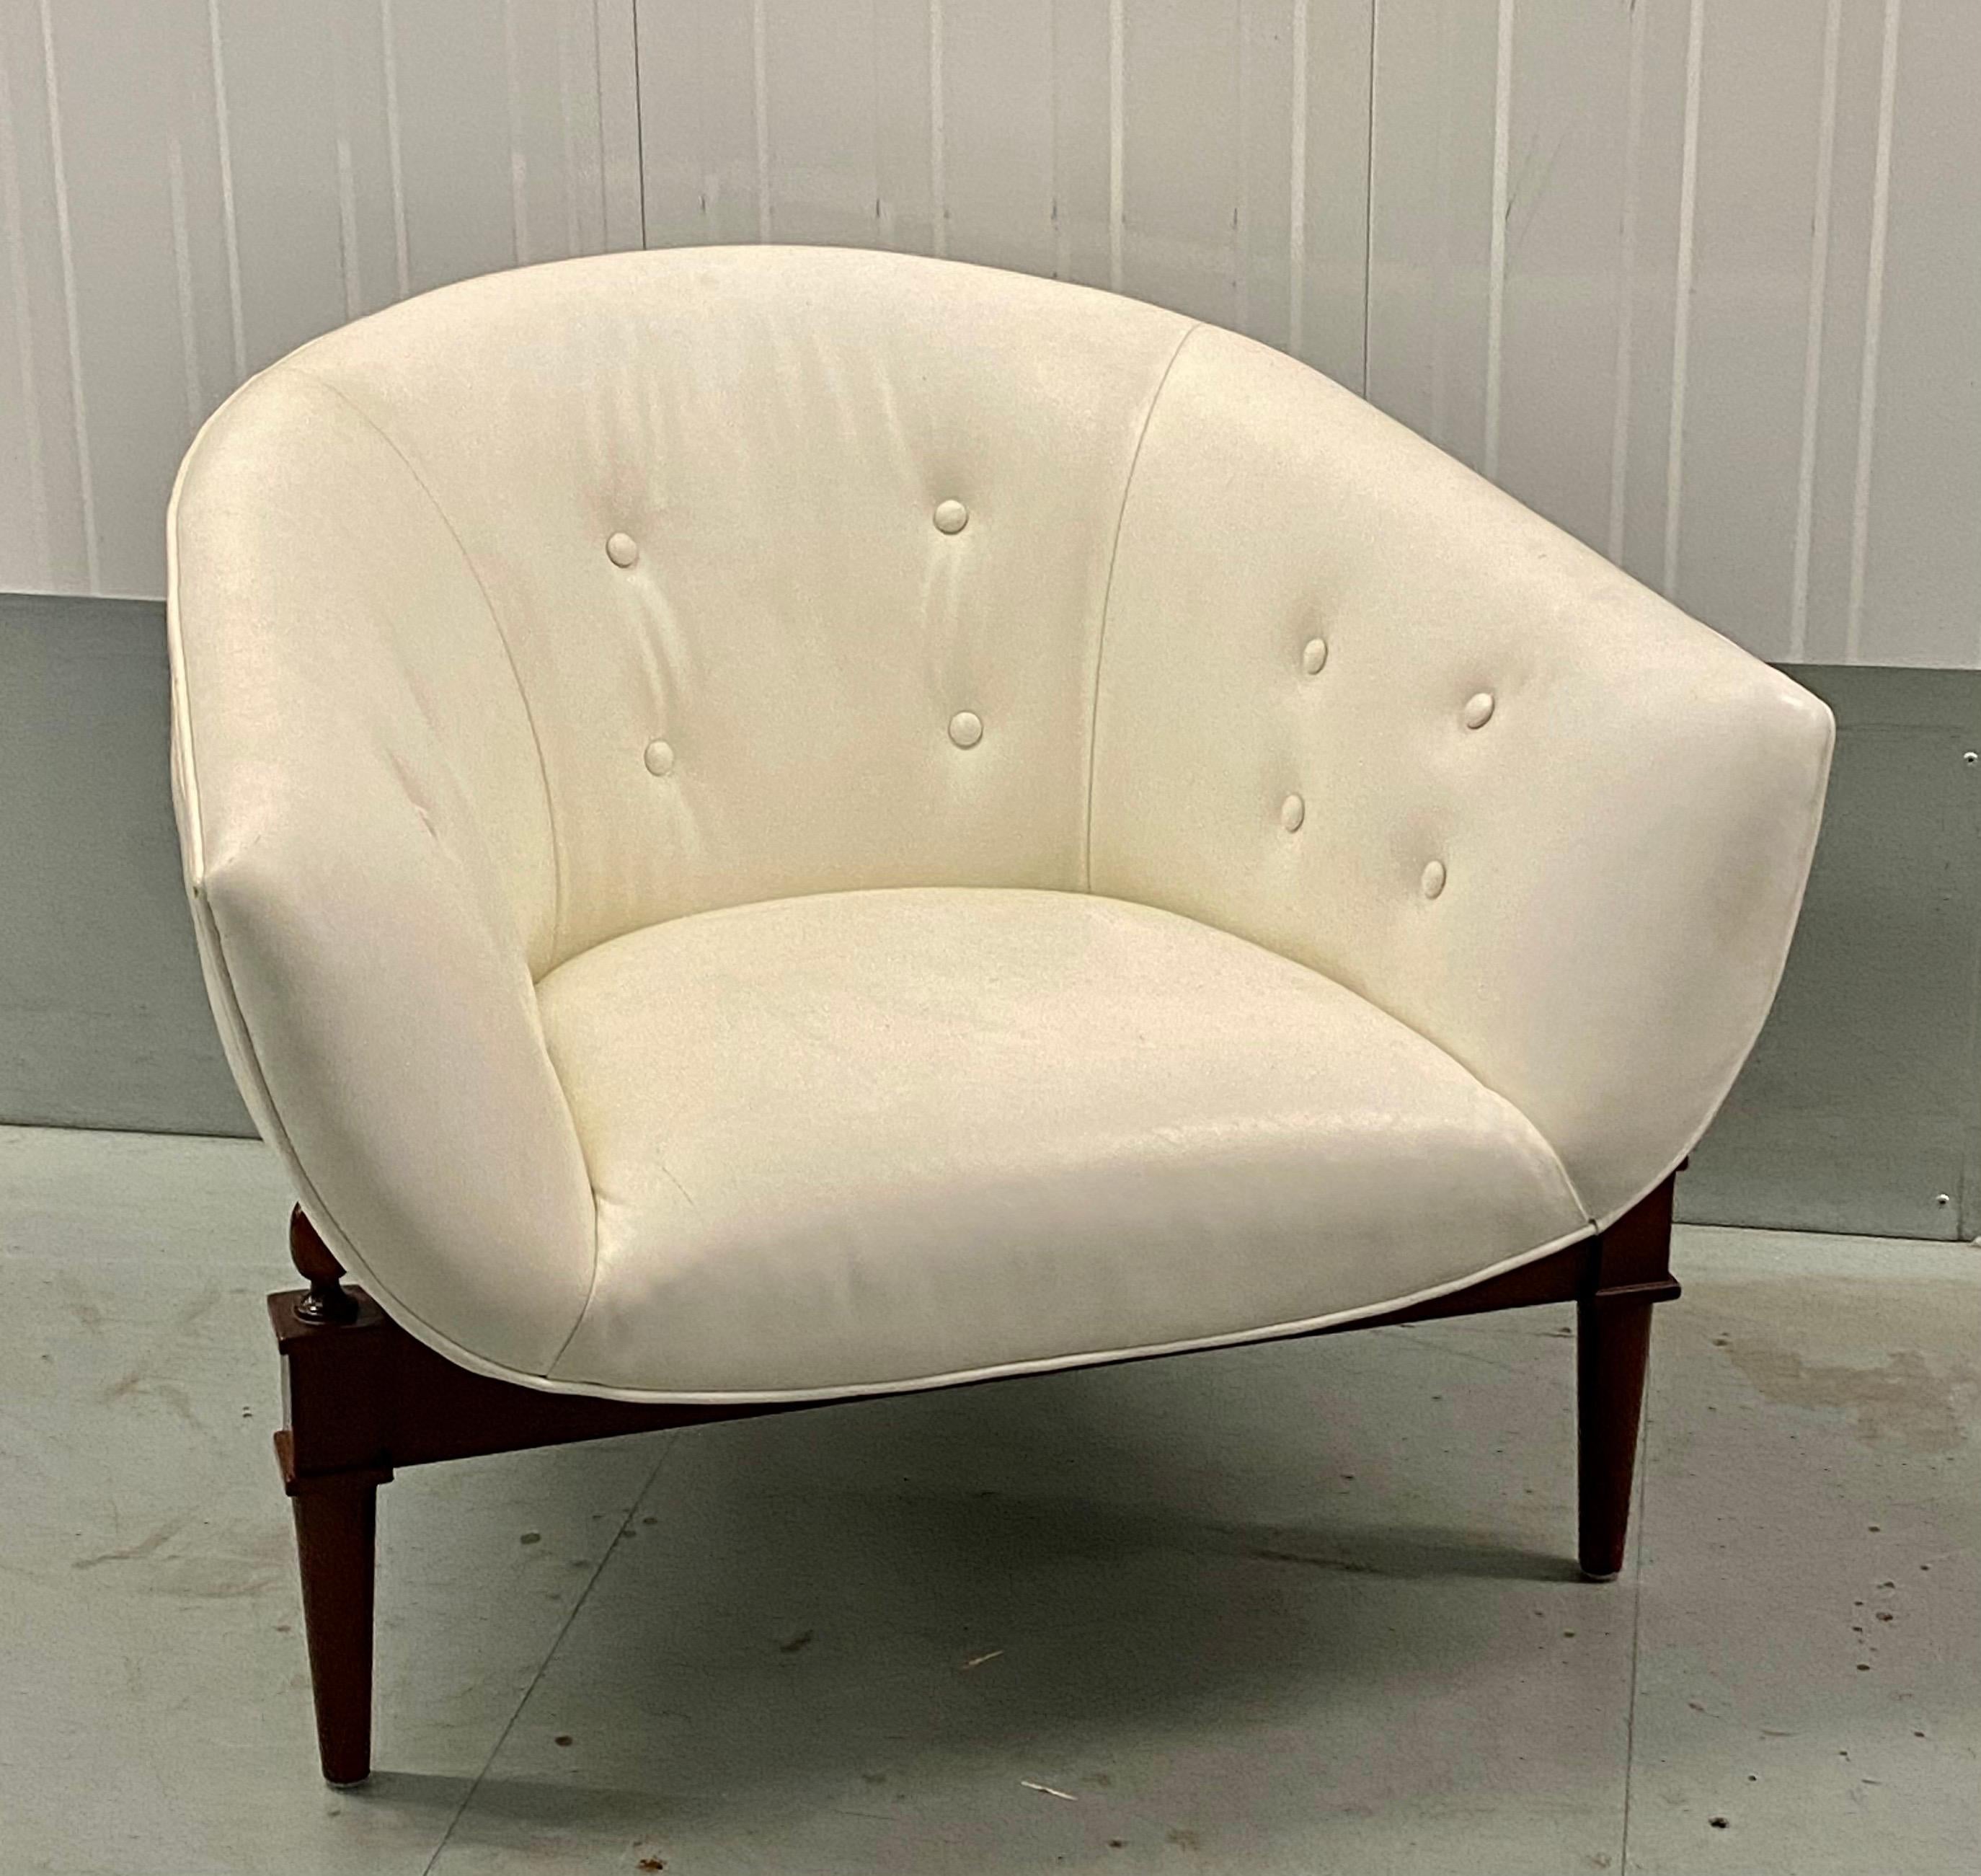 Global Views - 2367 - Mimi Chair - Reminiscent of the glamorous 1960's, the Global Views Mimi Chair marries modern design, exceptional craftsmanship, and very livable comfort. The barrel seat is covered in top grain cowhide leather, perched at a